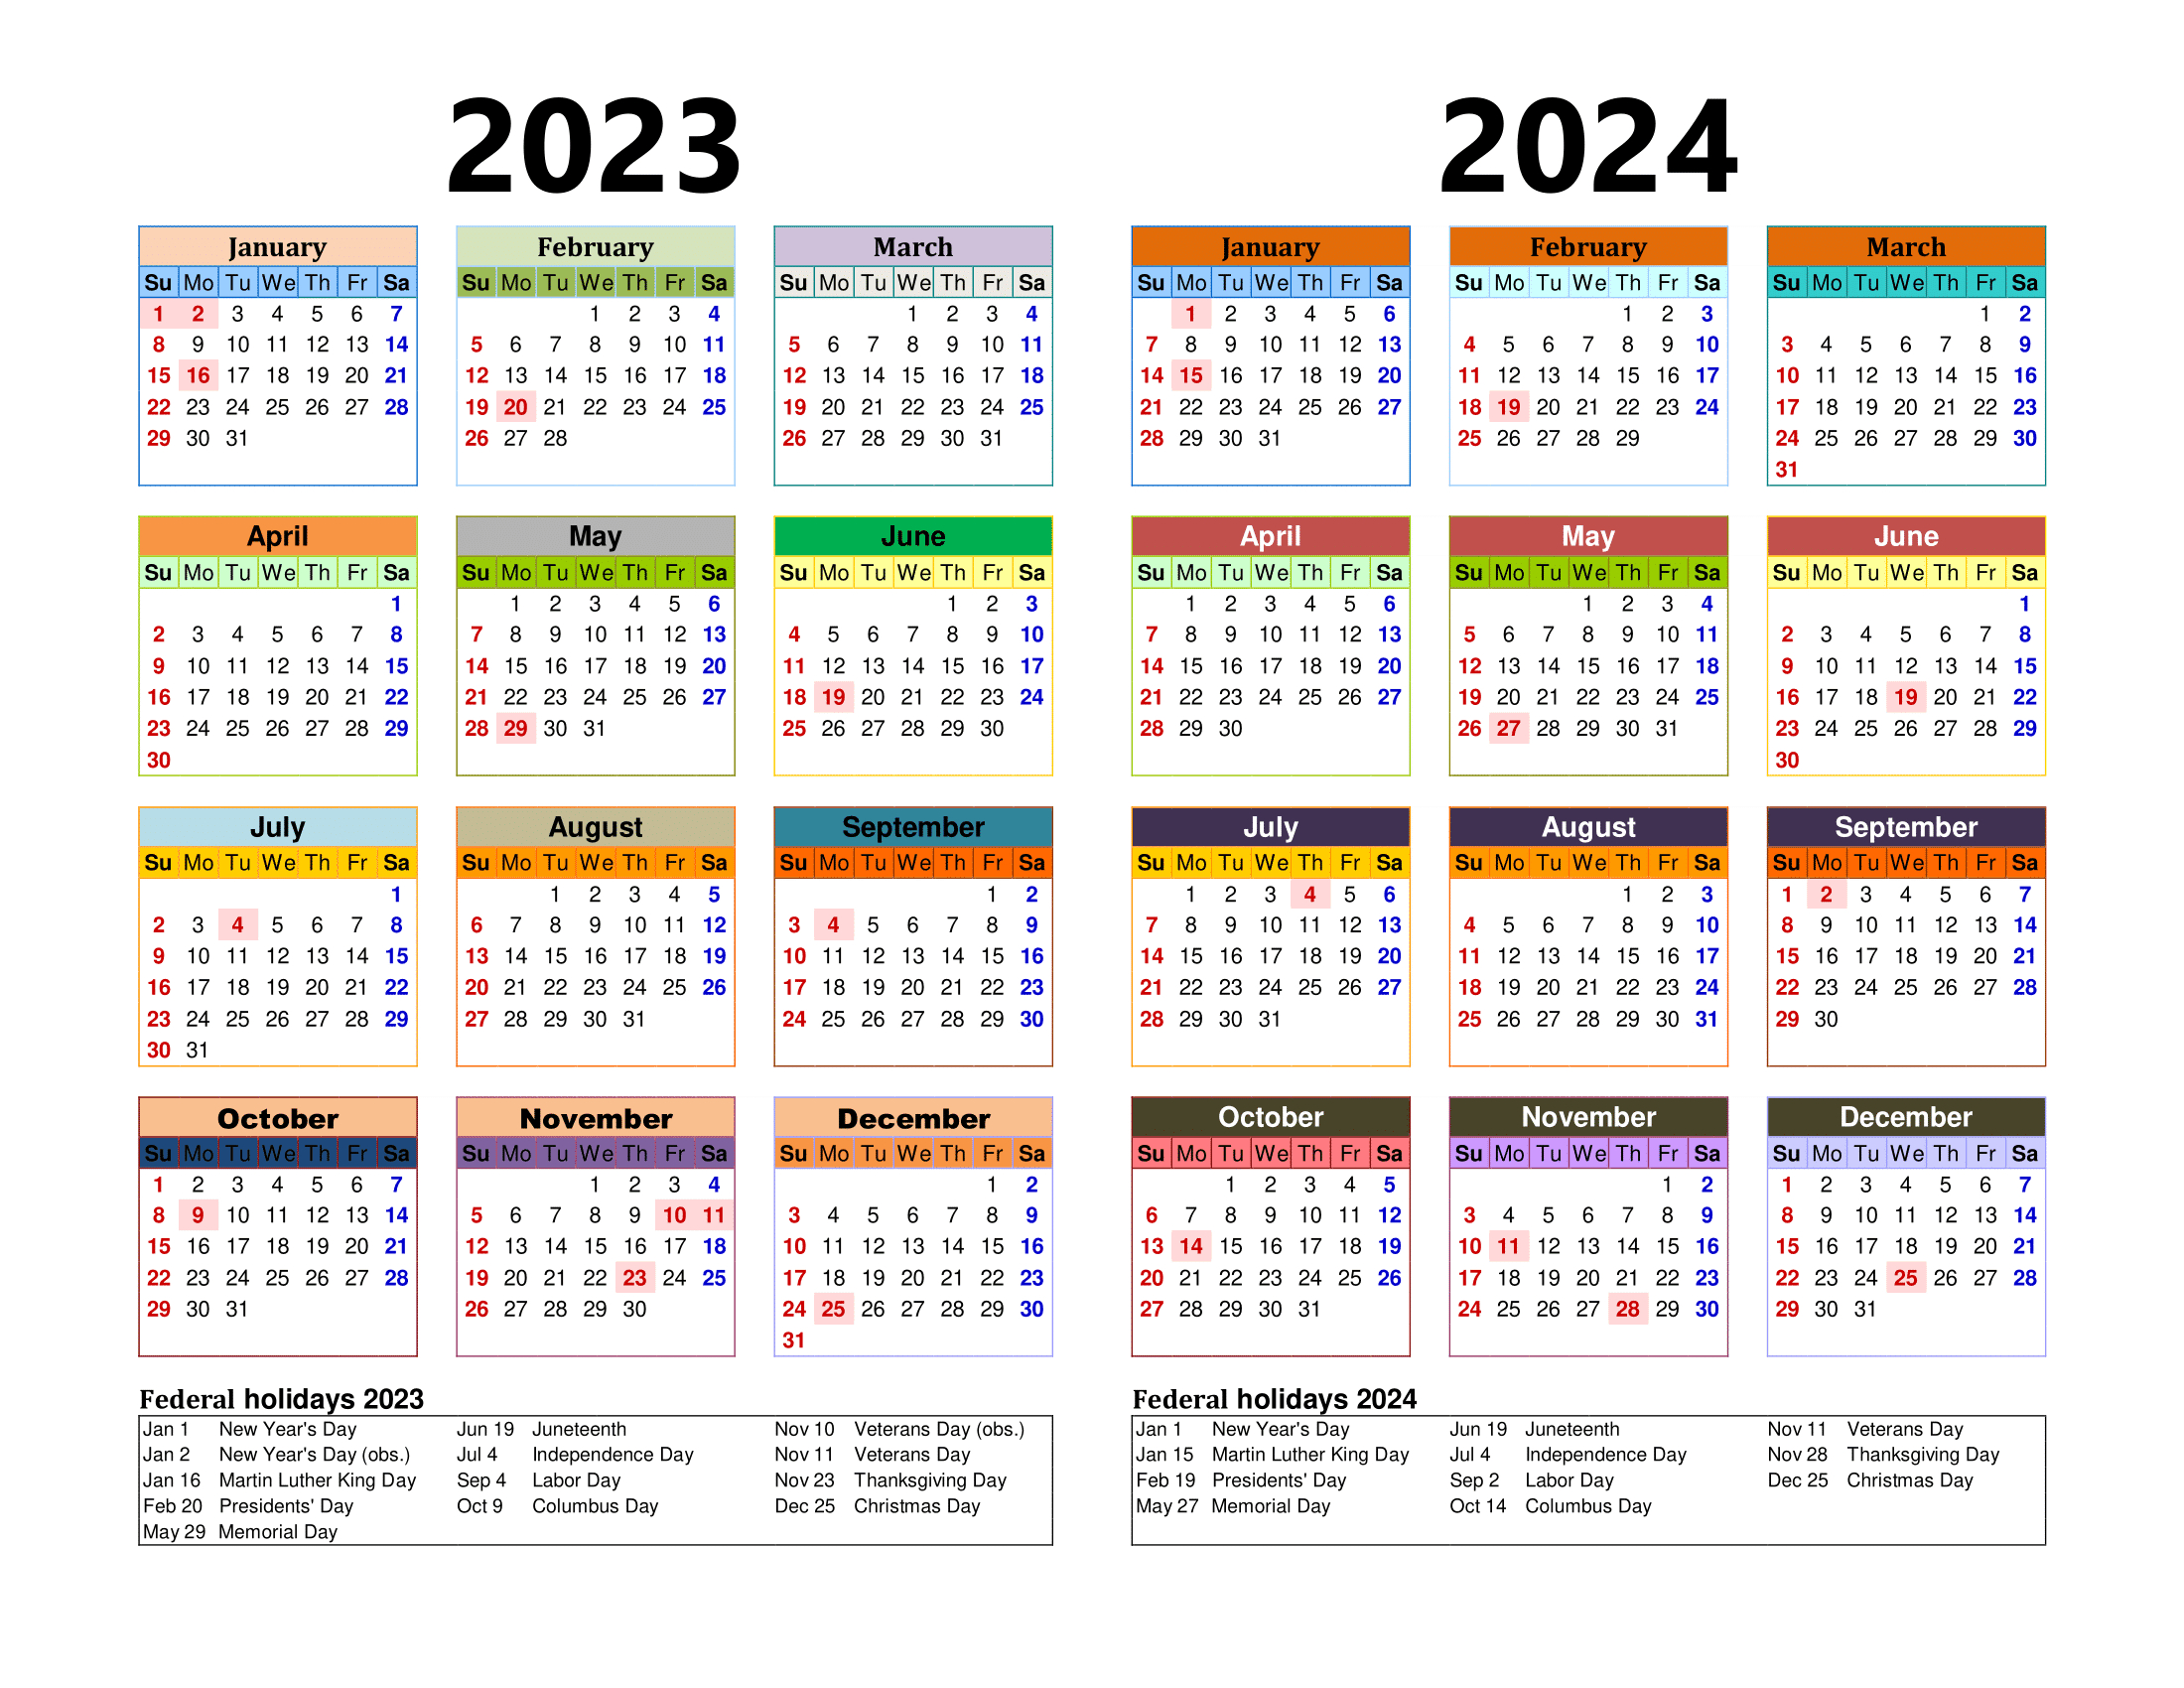 Free Printable Two Year Calendar Templates For 2023 And 2024 In Pdf | 2023 Calendar 2024 Printable Editable